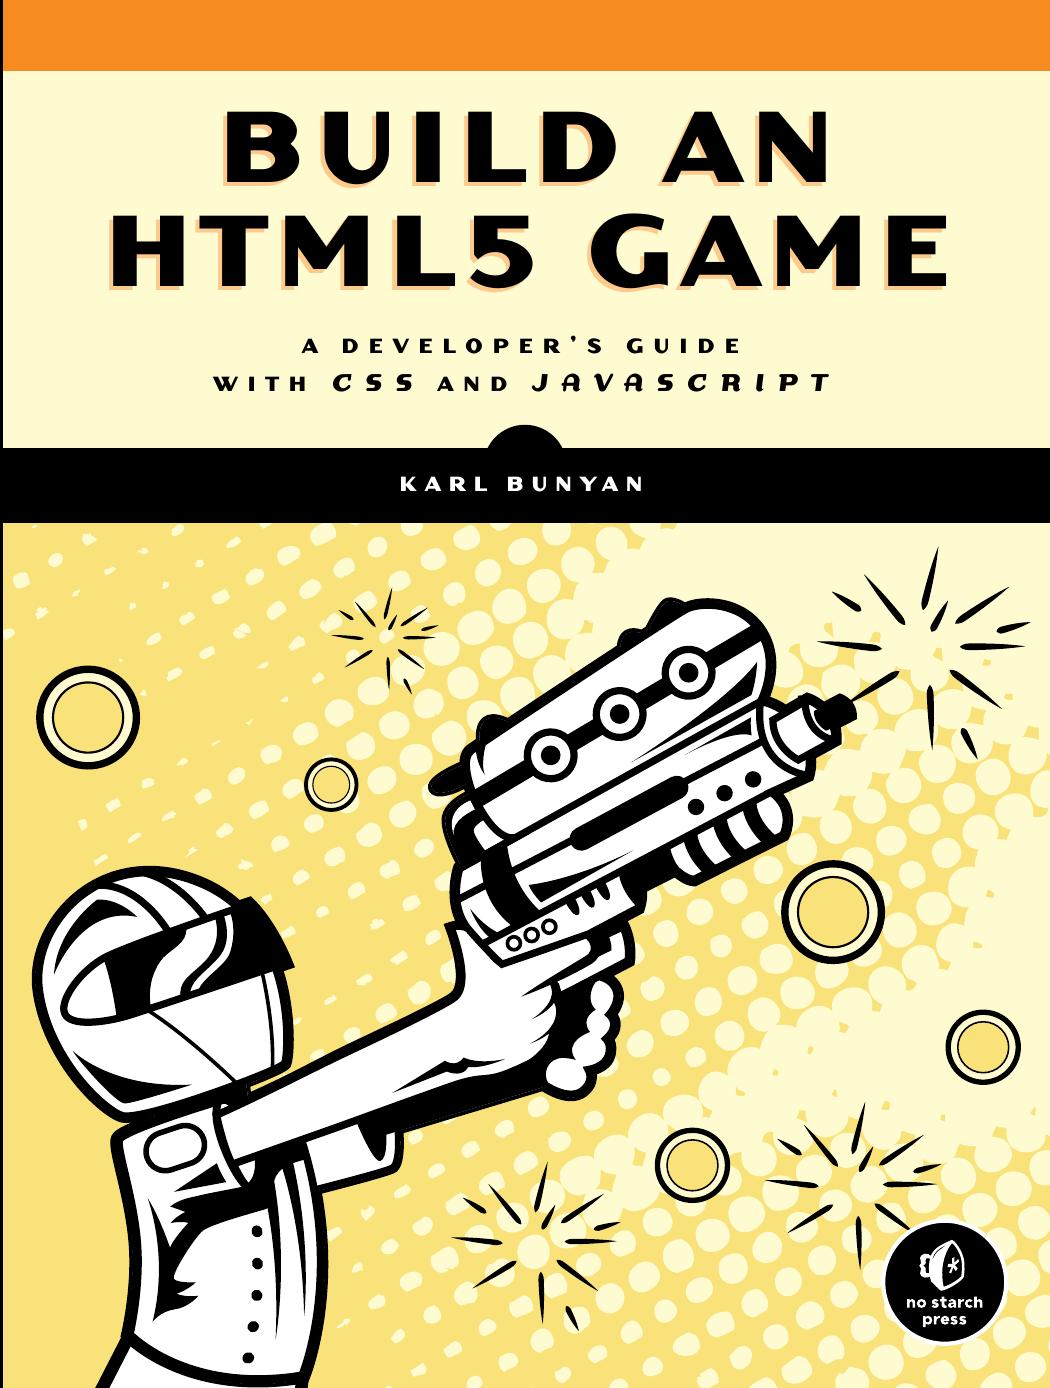 Build an HTML5 Game: A Developer's Guide With CSS and JavaScript